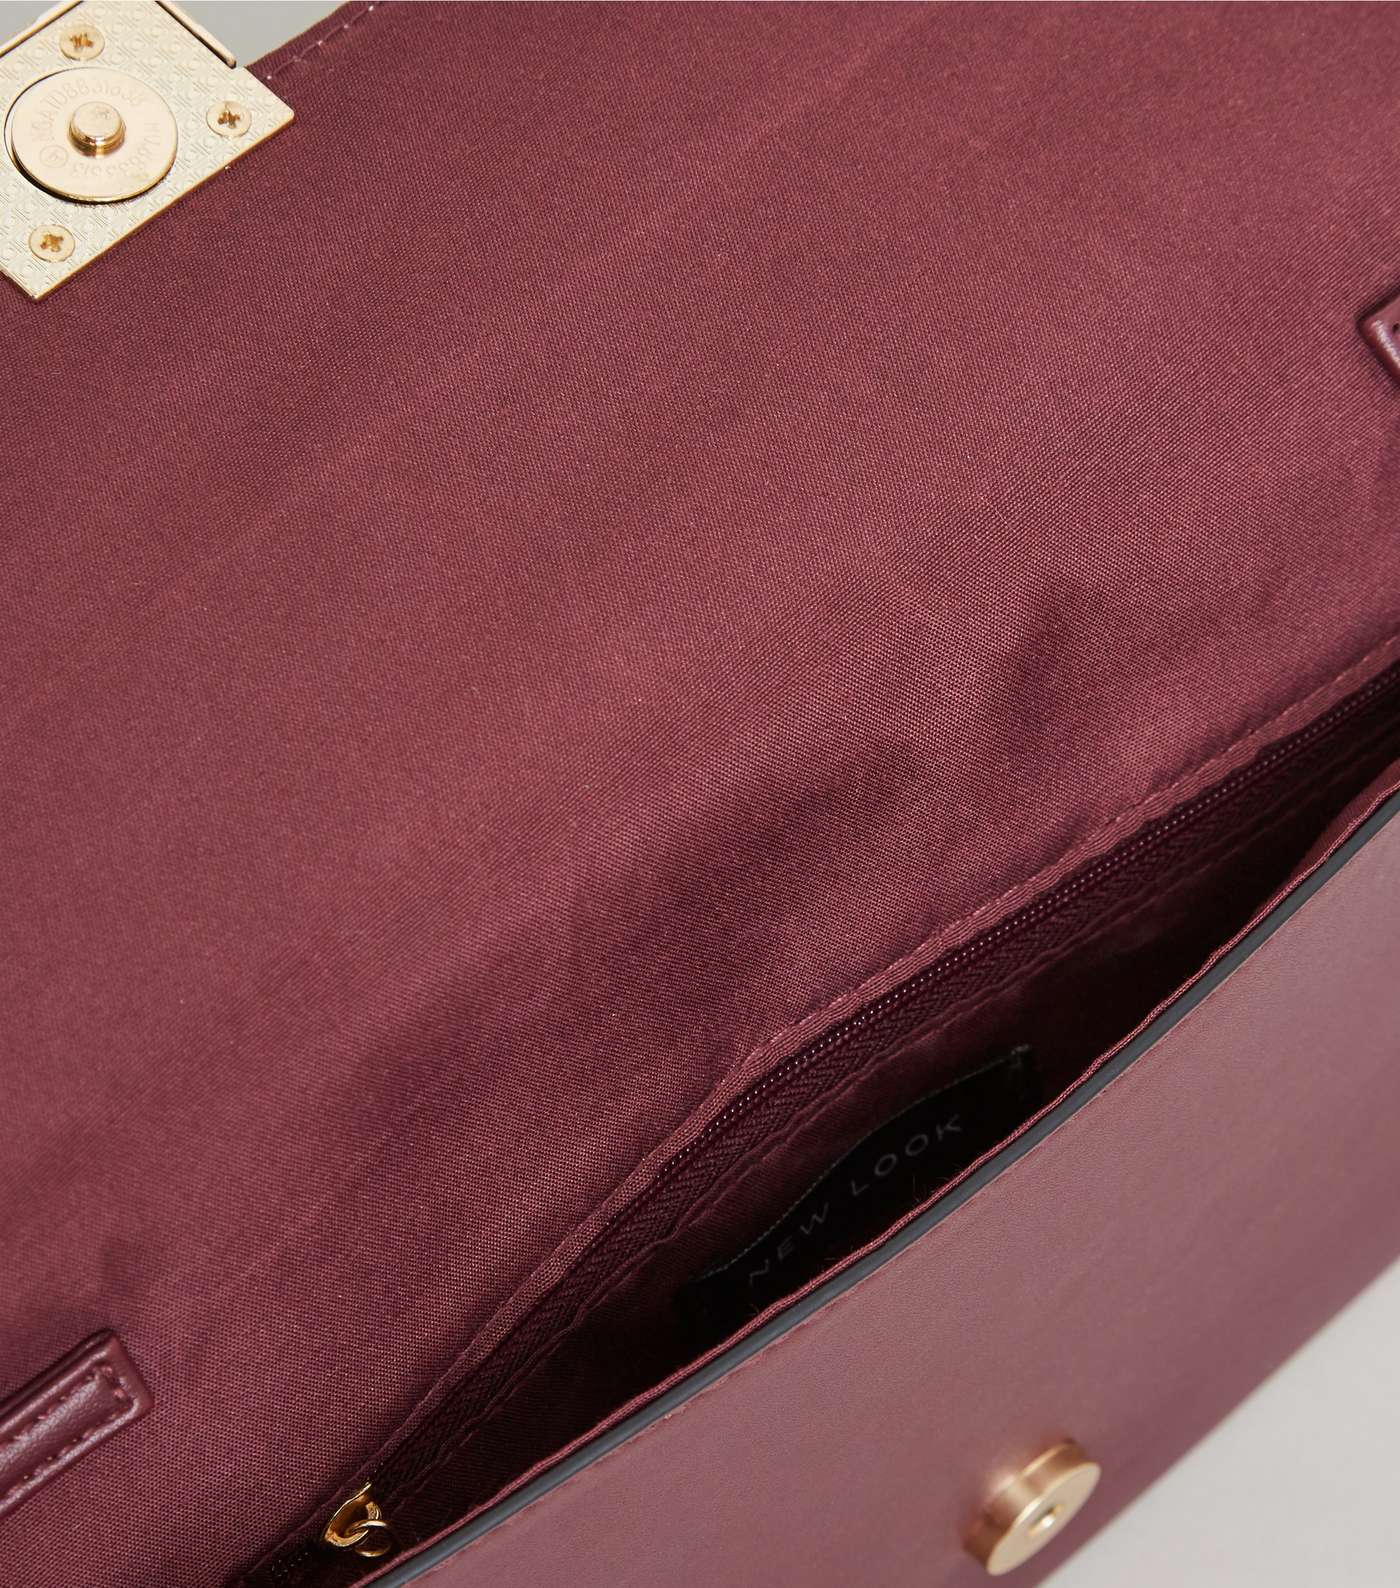 Burgundy Leather-Look Suedette Clutch Bag Image 4